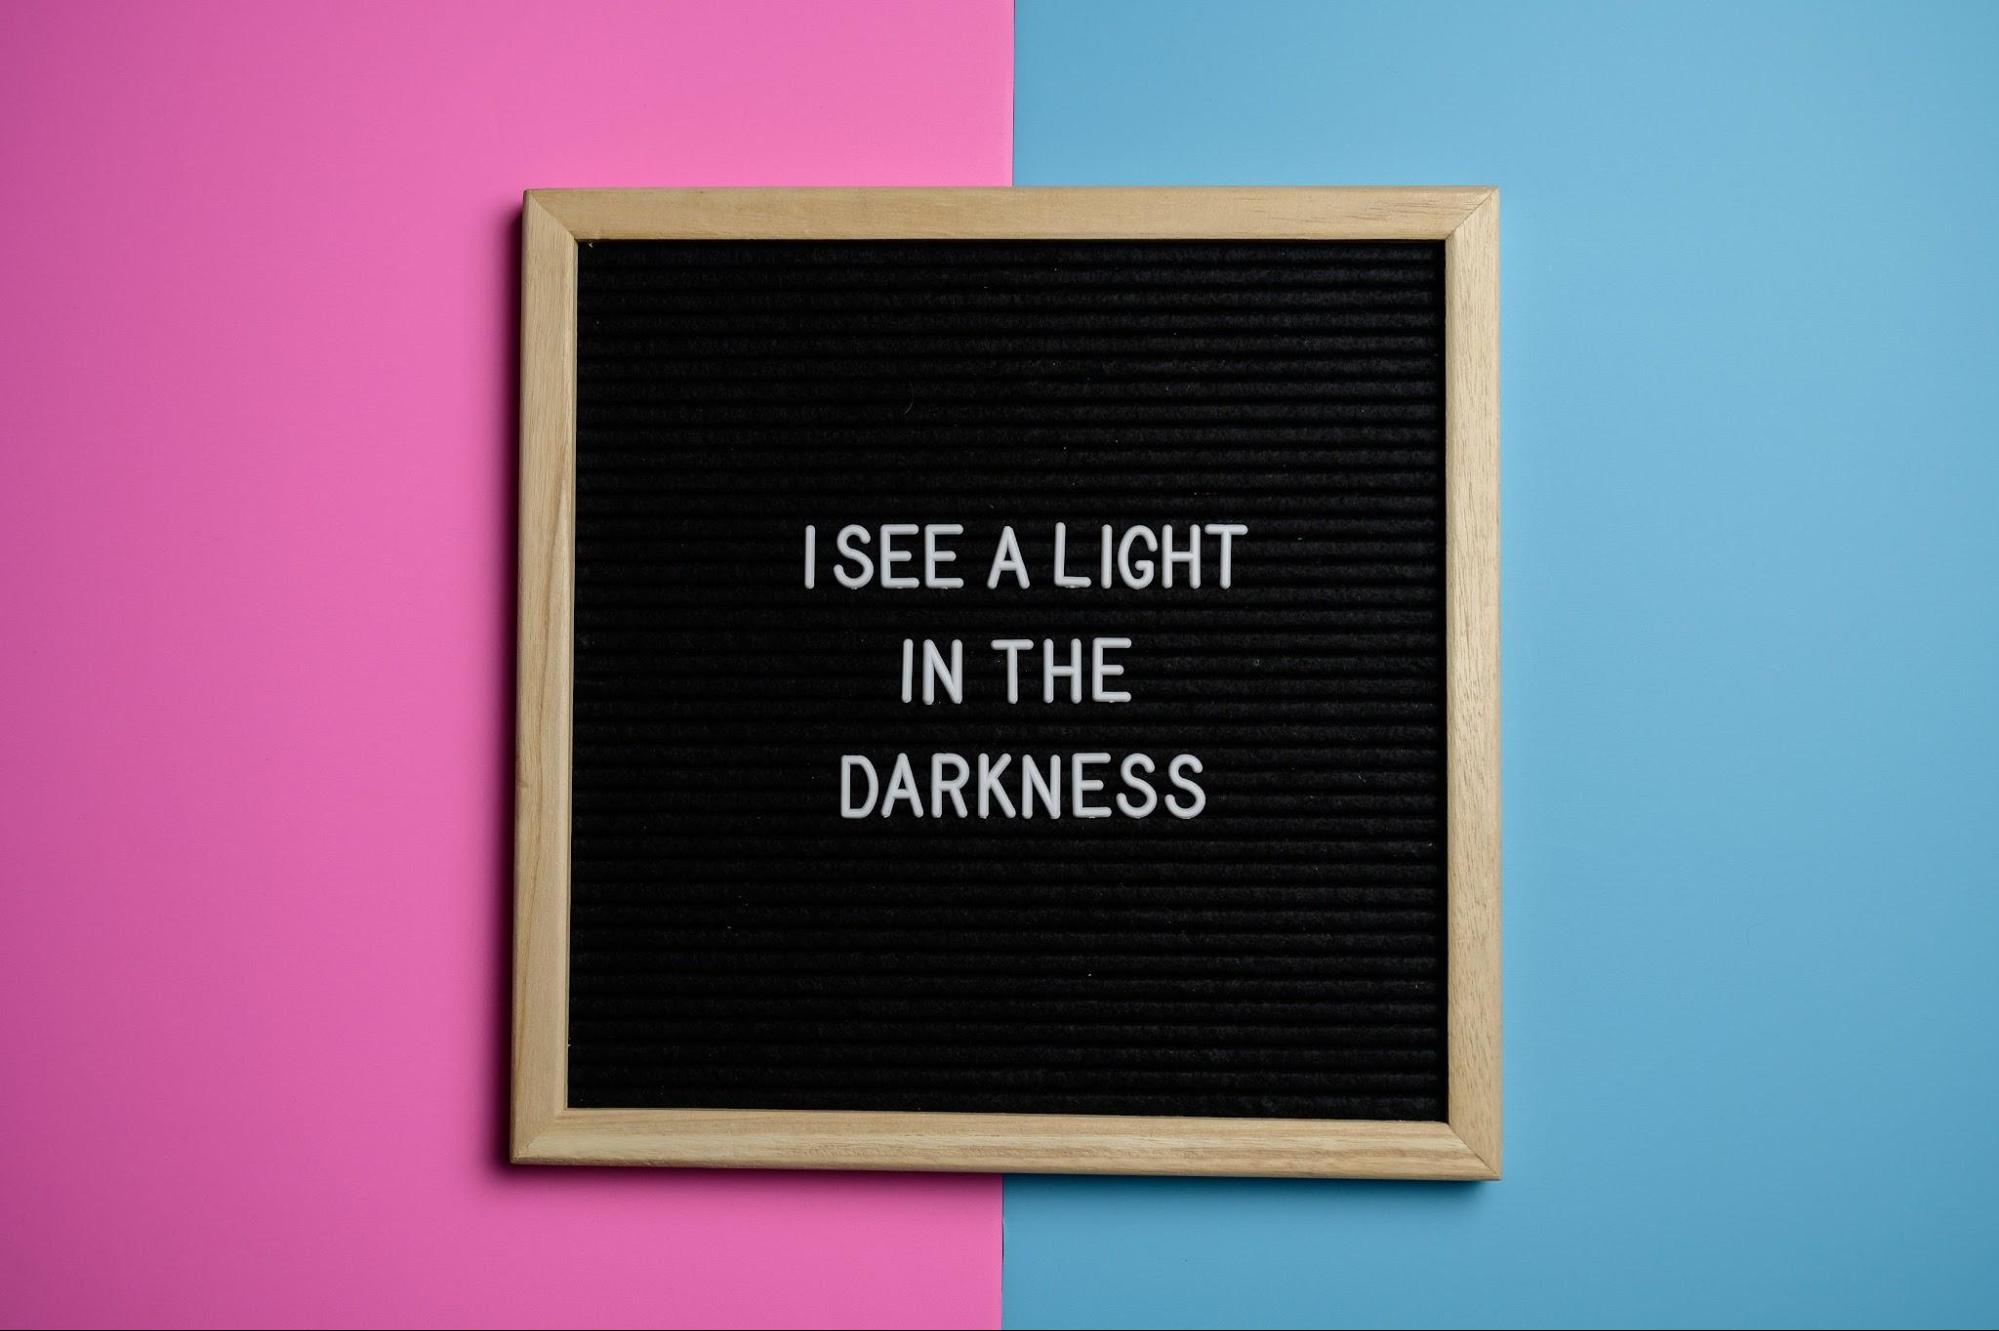 Letter board spelling “I see a light in the darkness.